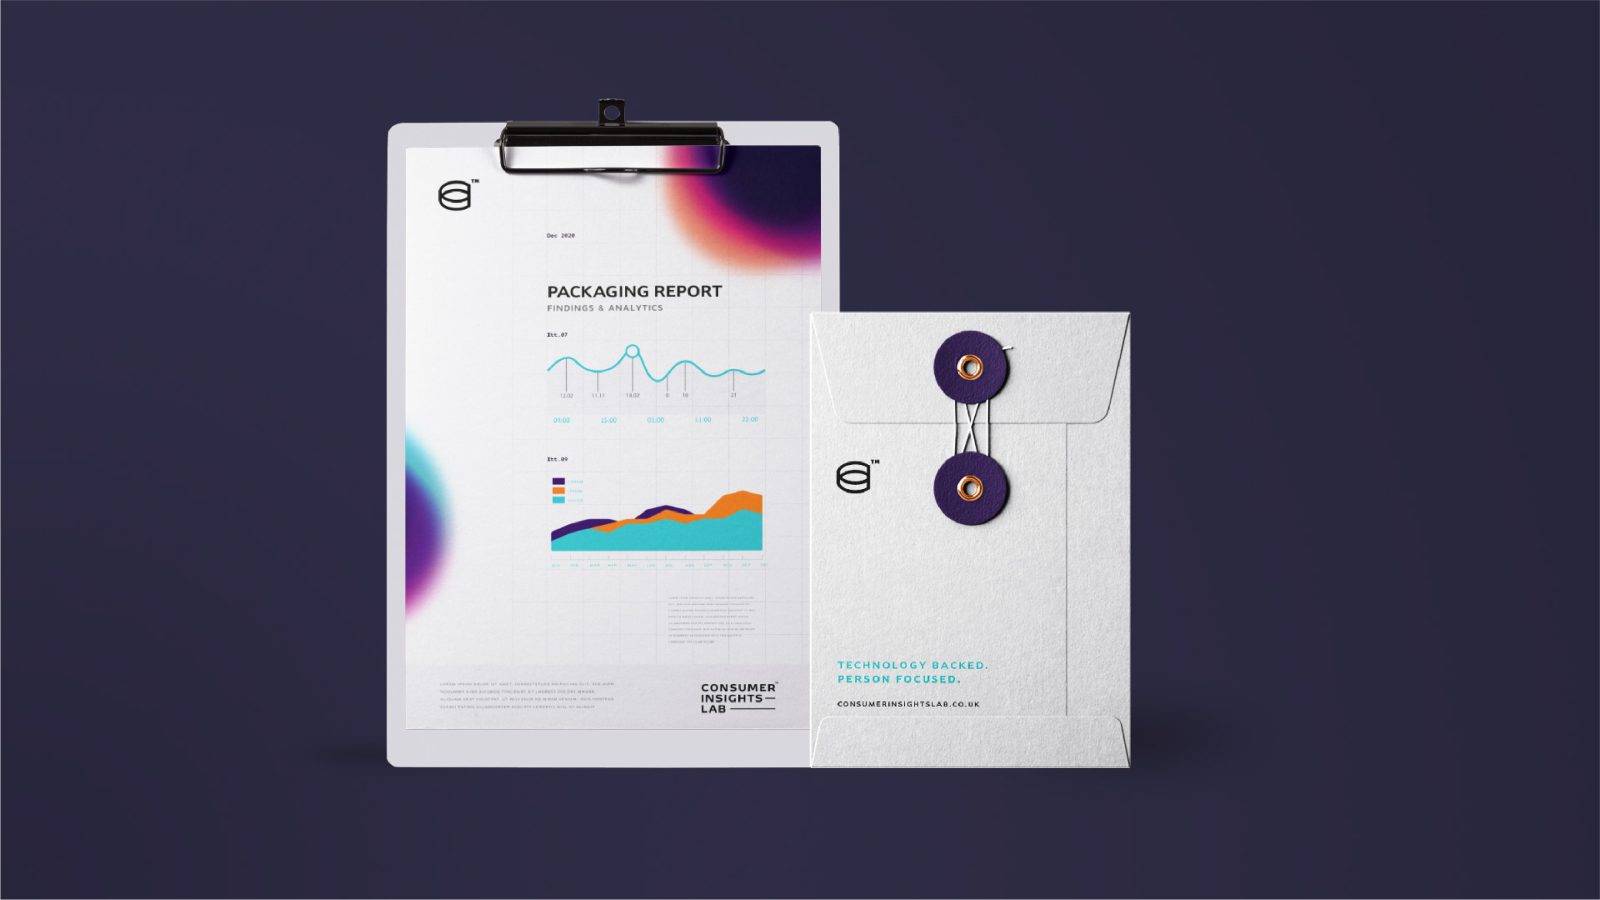 A packaging report on a clipboard displaying colorful charts and graphs, next to an envelope with identifying tags on a purple background, prepared by Design Agency UK.